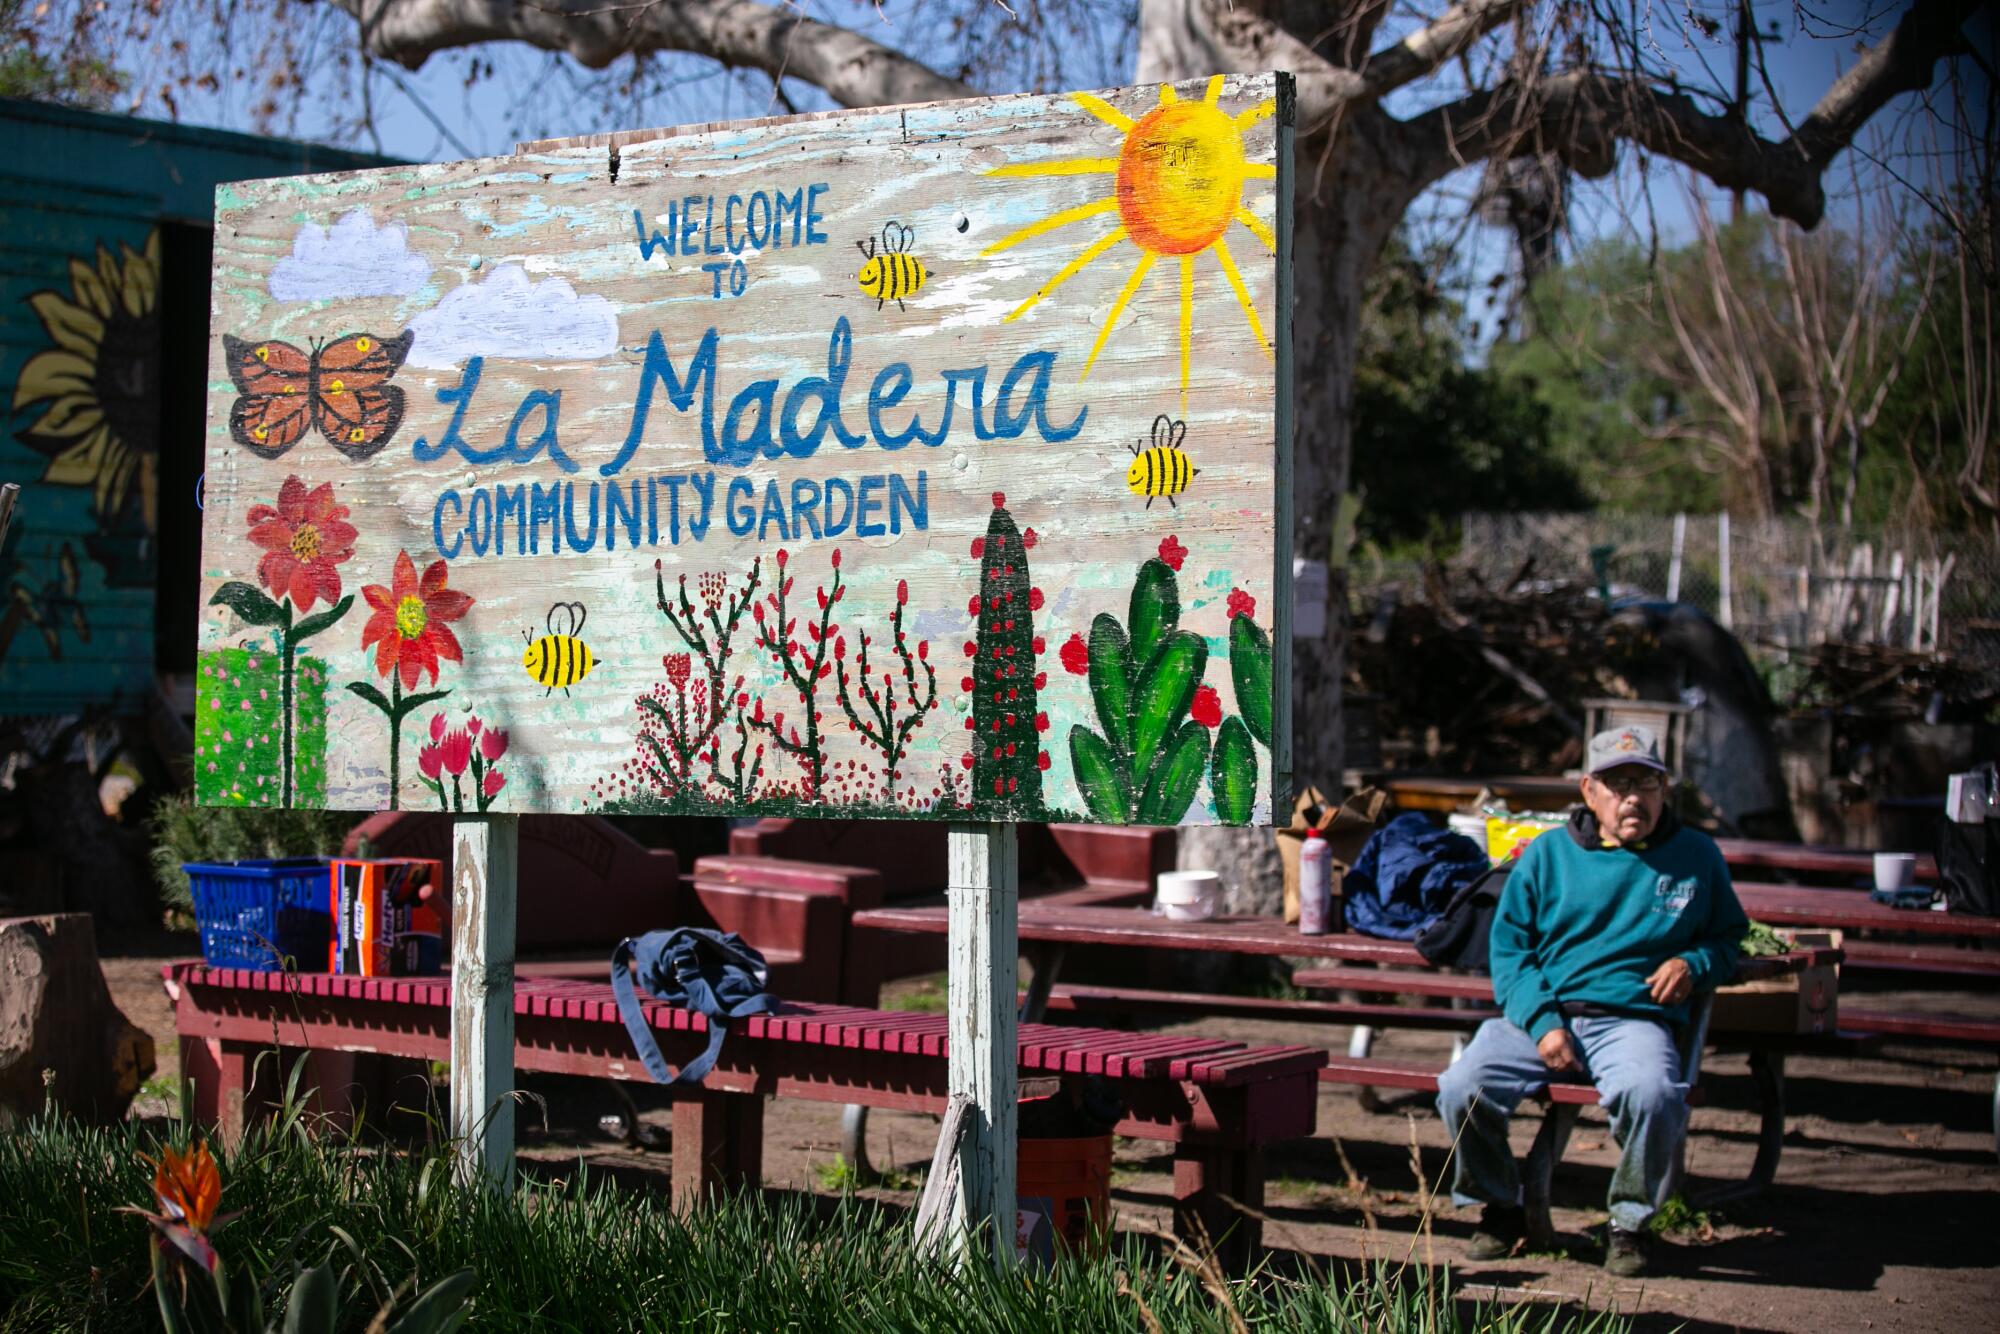 Small Axe Peppers has partnered with La Madera Community Garden in El Monte to make a Los Angeles-flavored sauce.